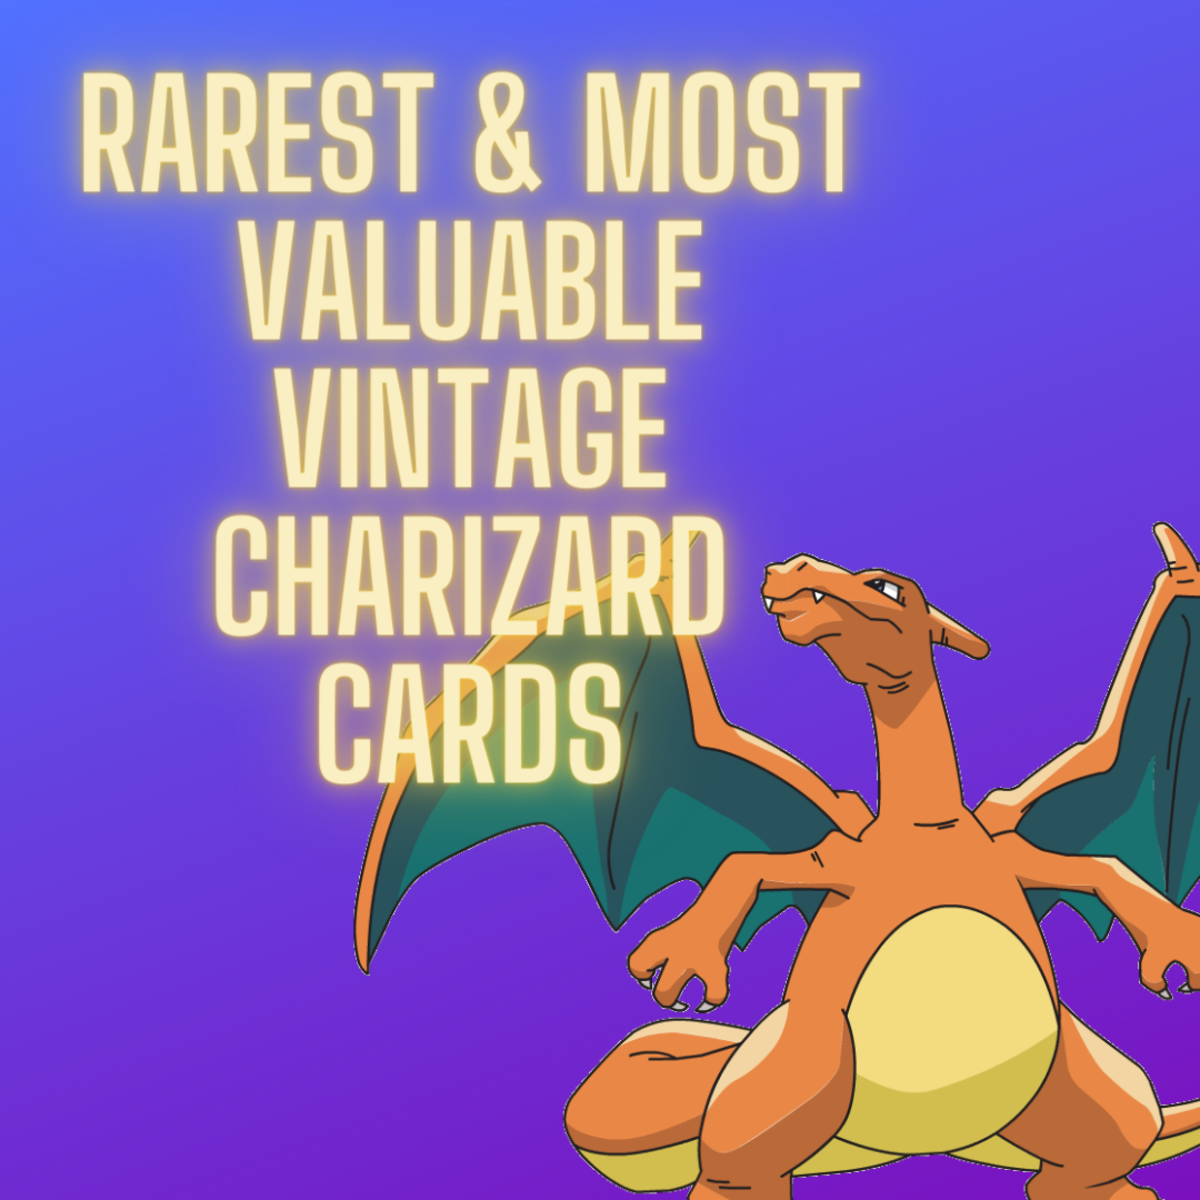 Pokémon TCG: 5 of the Rarest and Most Valuable Vintage Charizard Cards